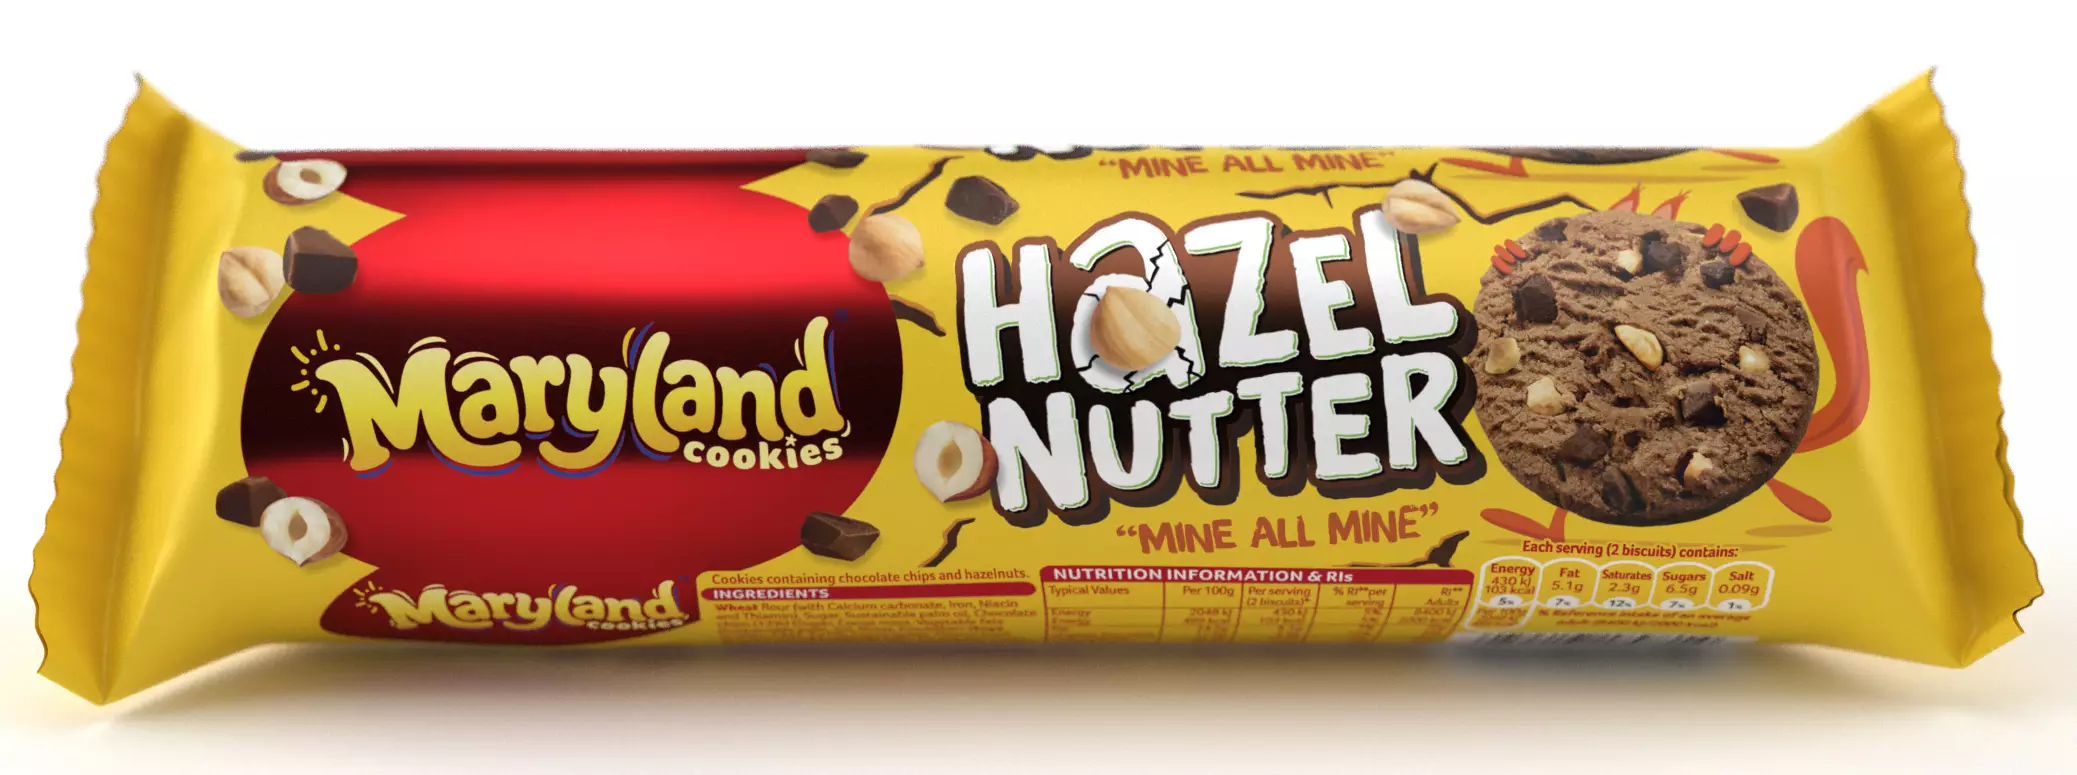 Hazelnutter is available in Asda from 22nd March for one month, and Tesco from 22nd April (